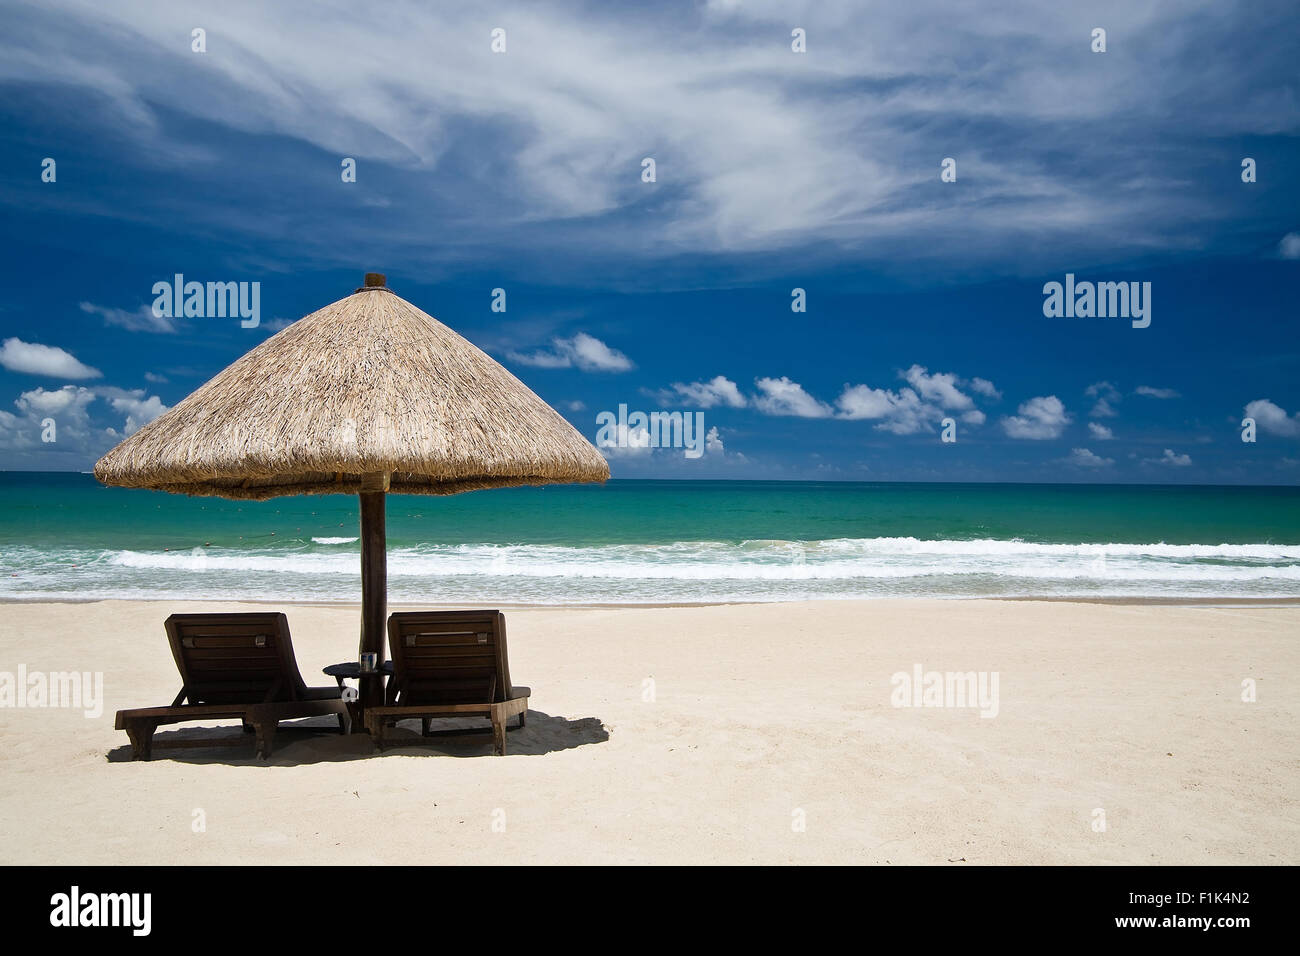 Beach with an umbrella and chairs Stock Photo